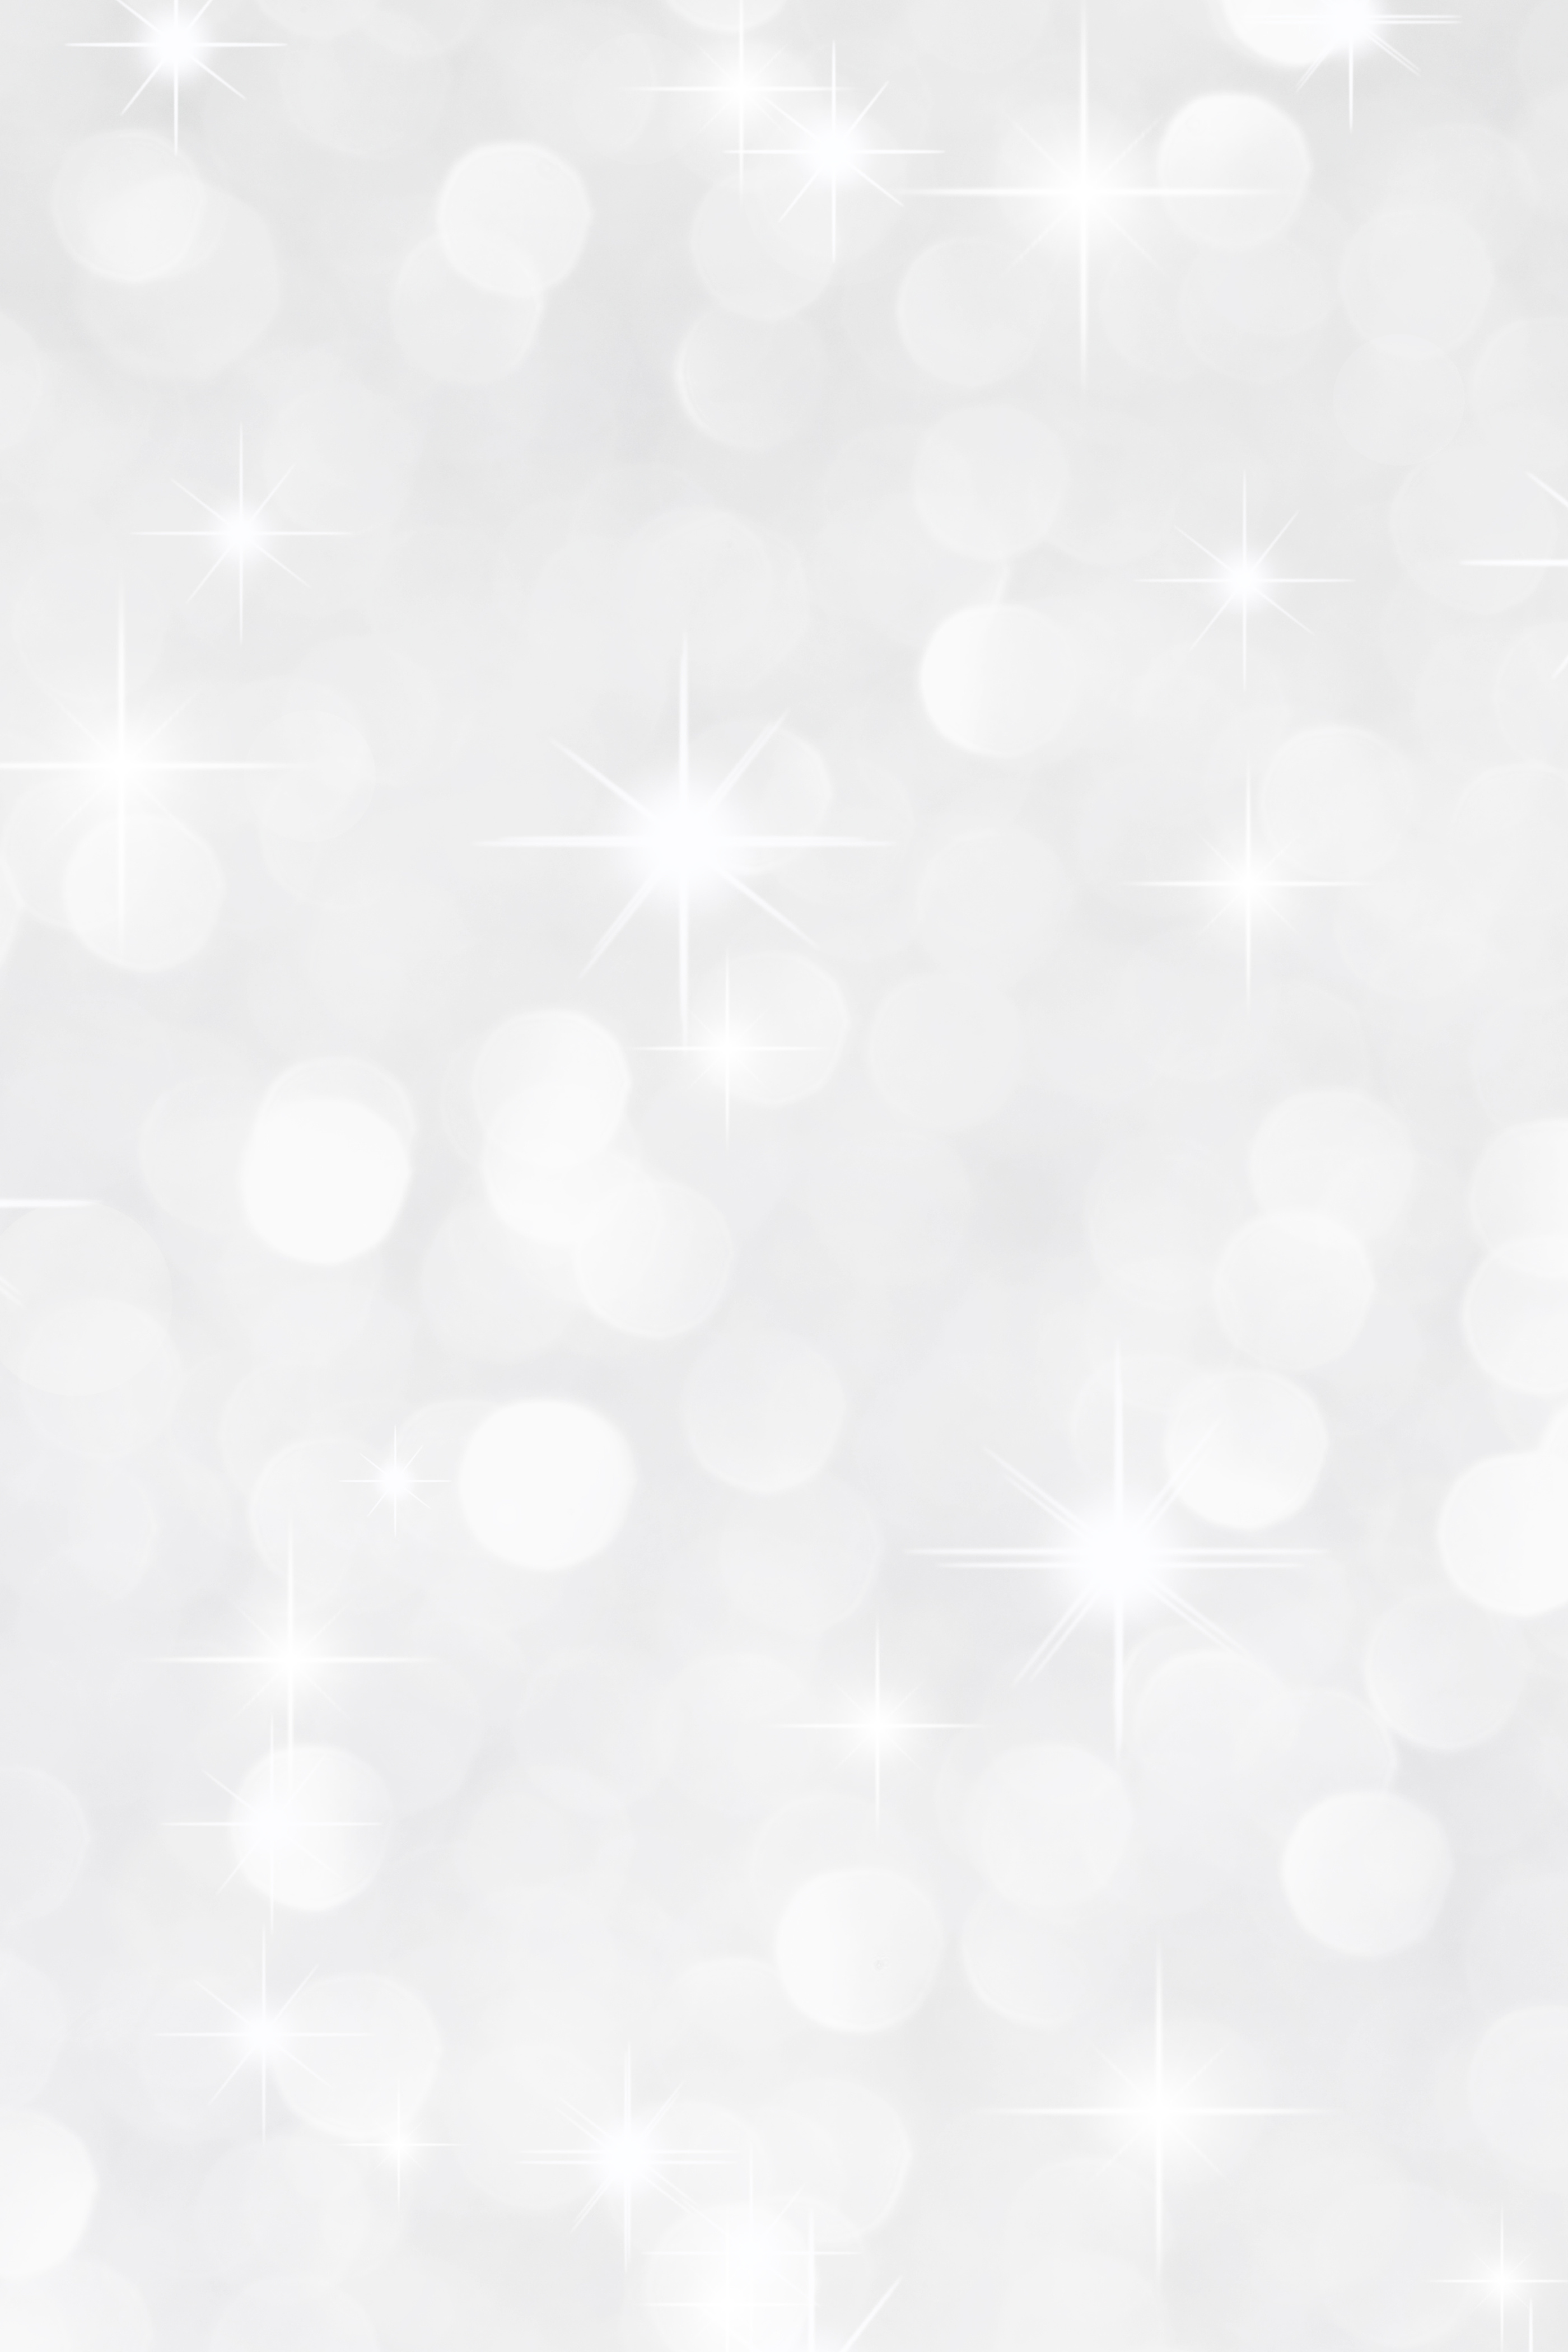 Glittering White Bokeh Lights Abstract Background